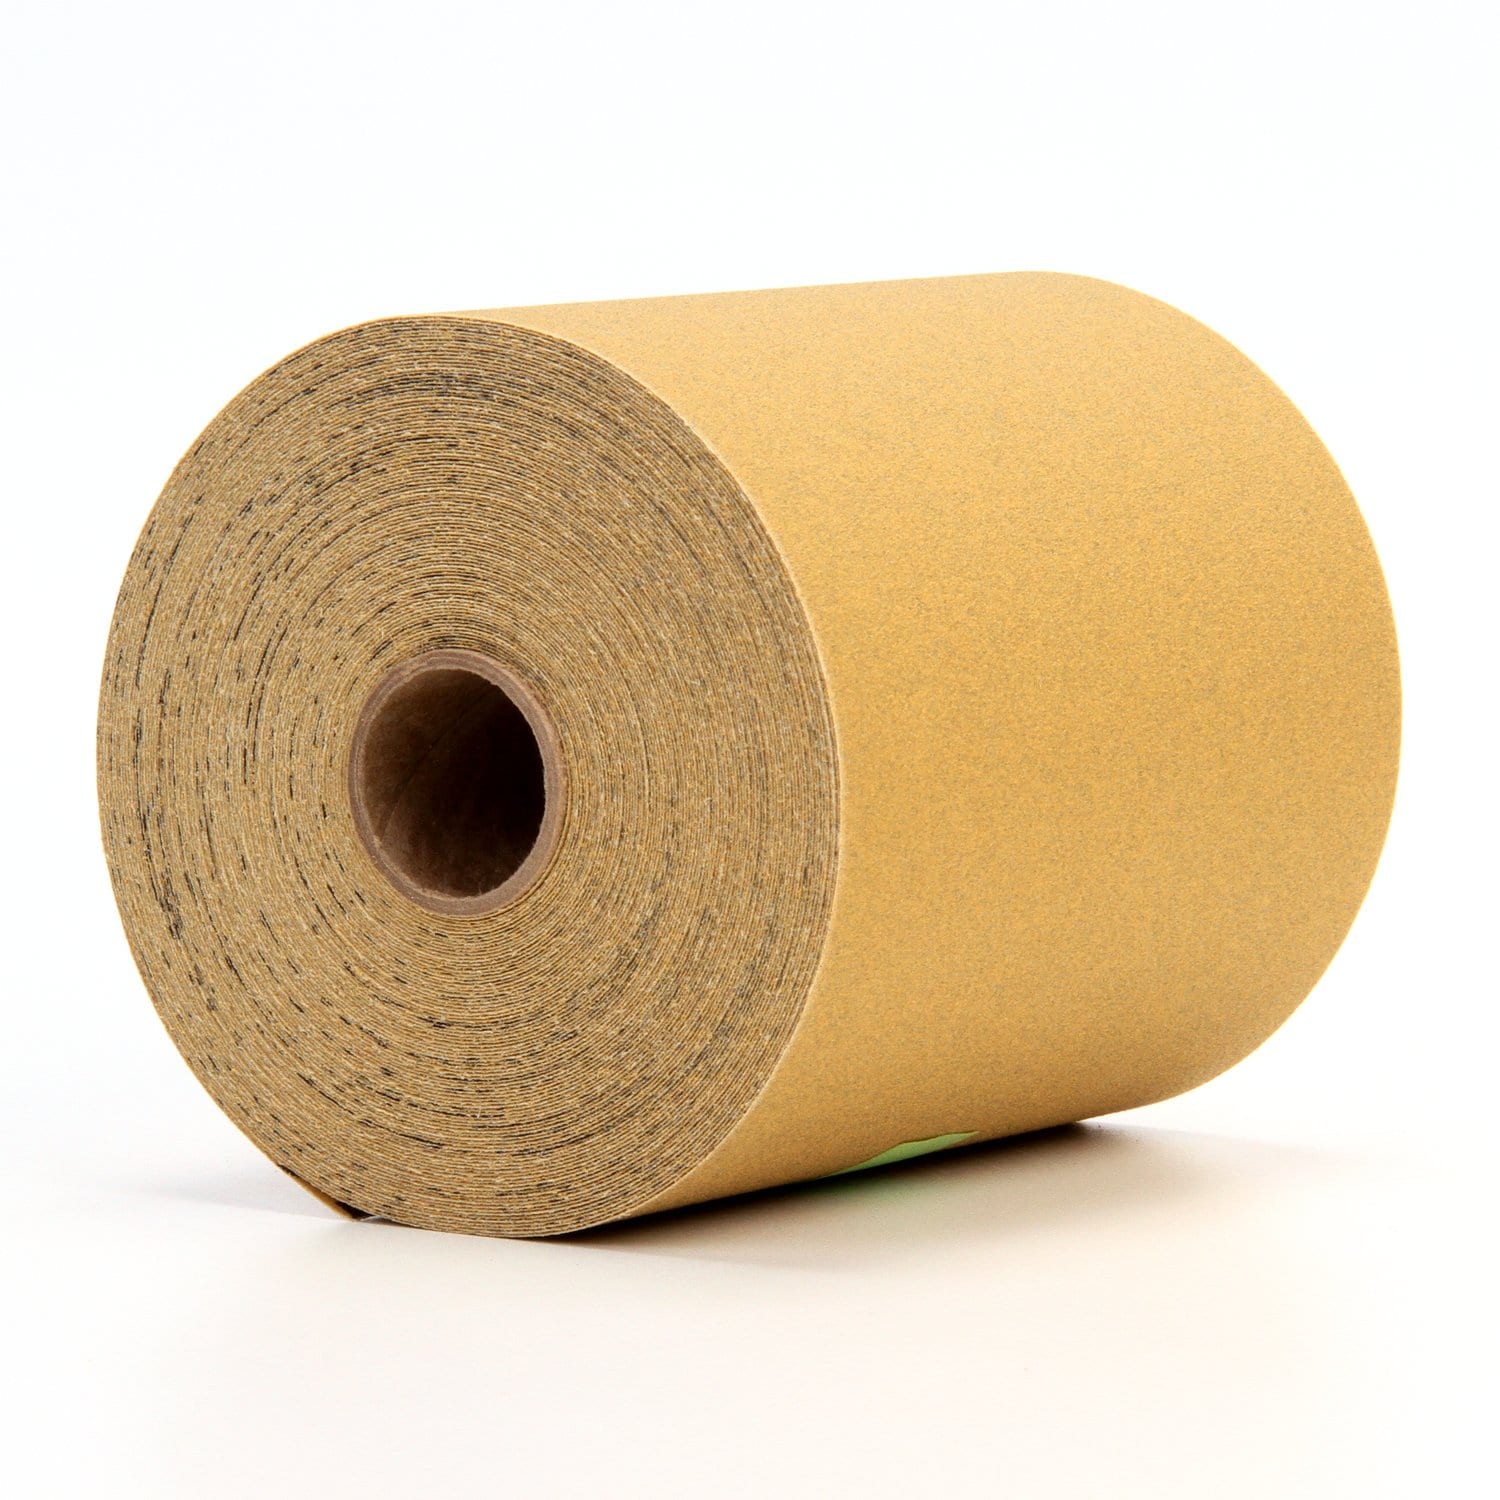 7100070001 - 3M Stikit Paper Roll 236U, P220 C-weight, Config